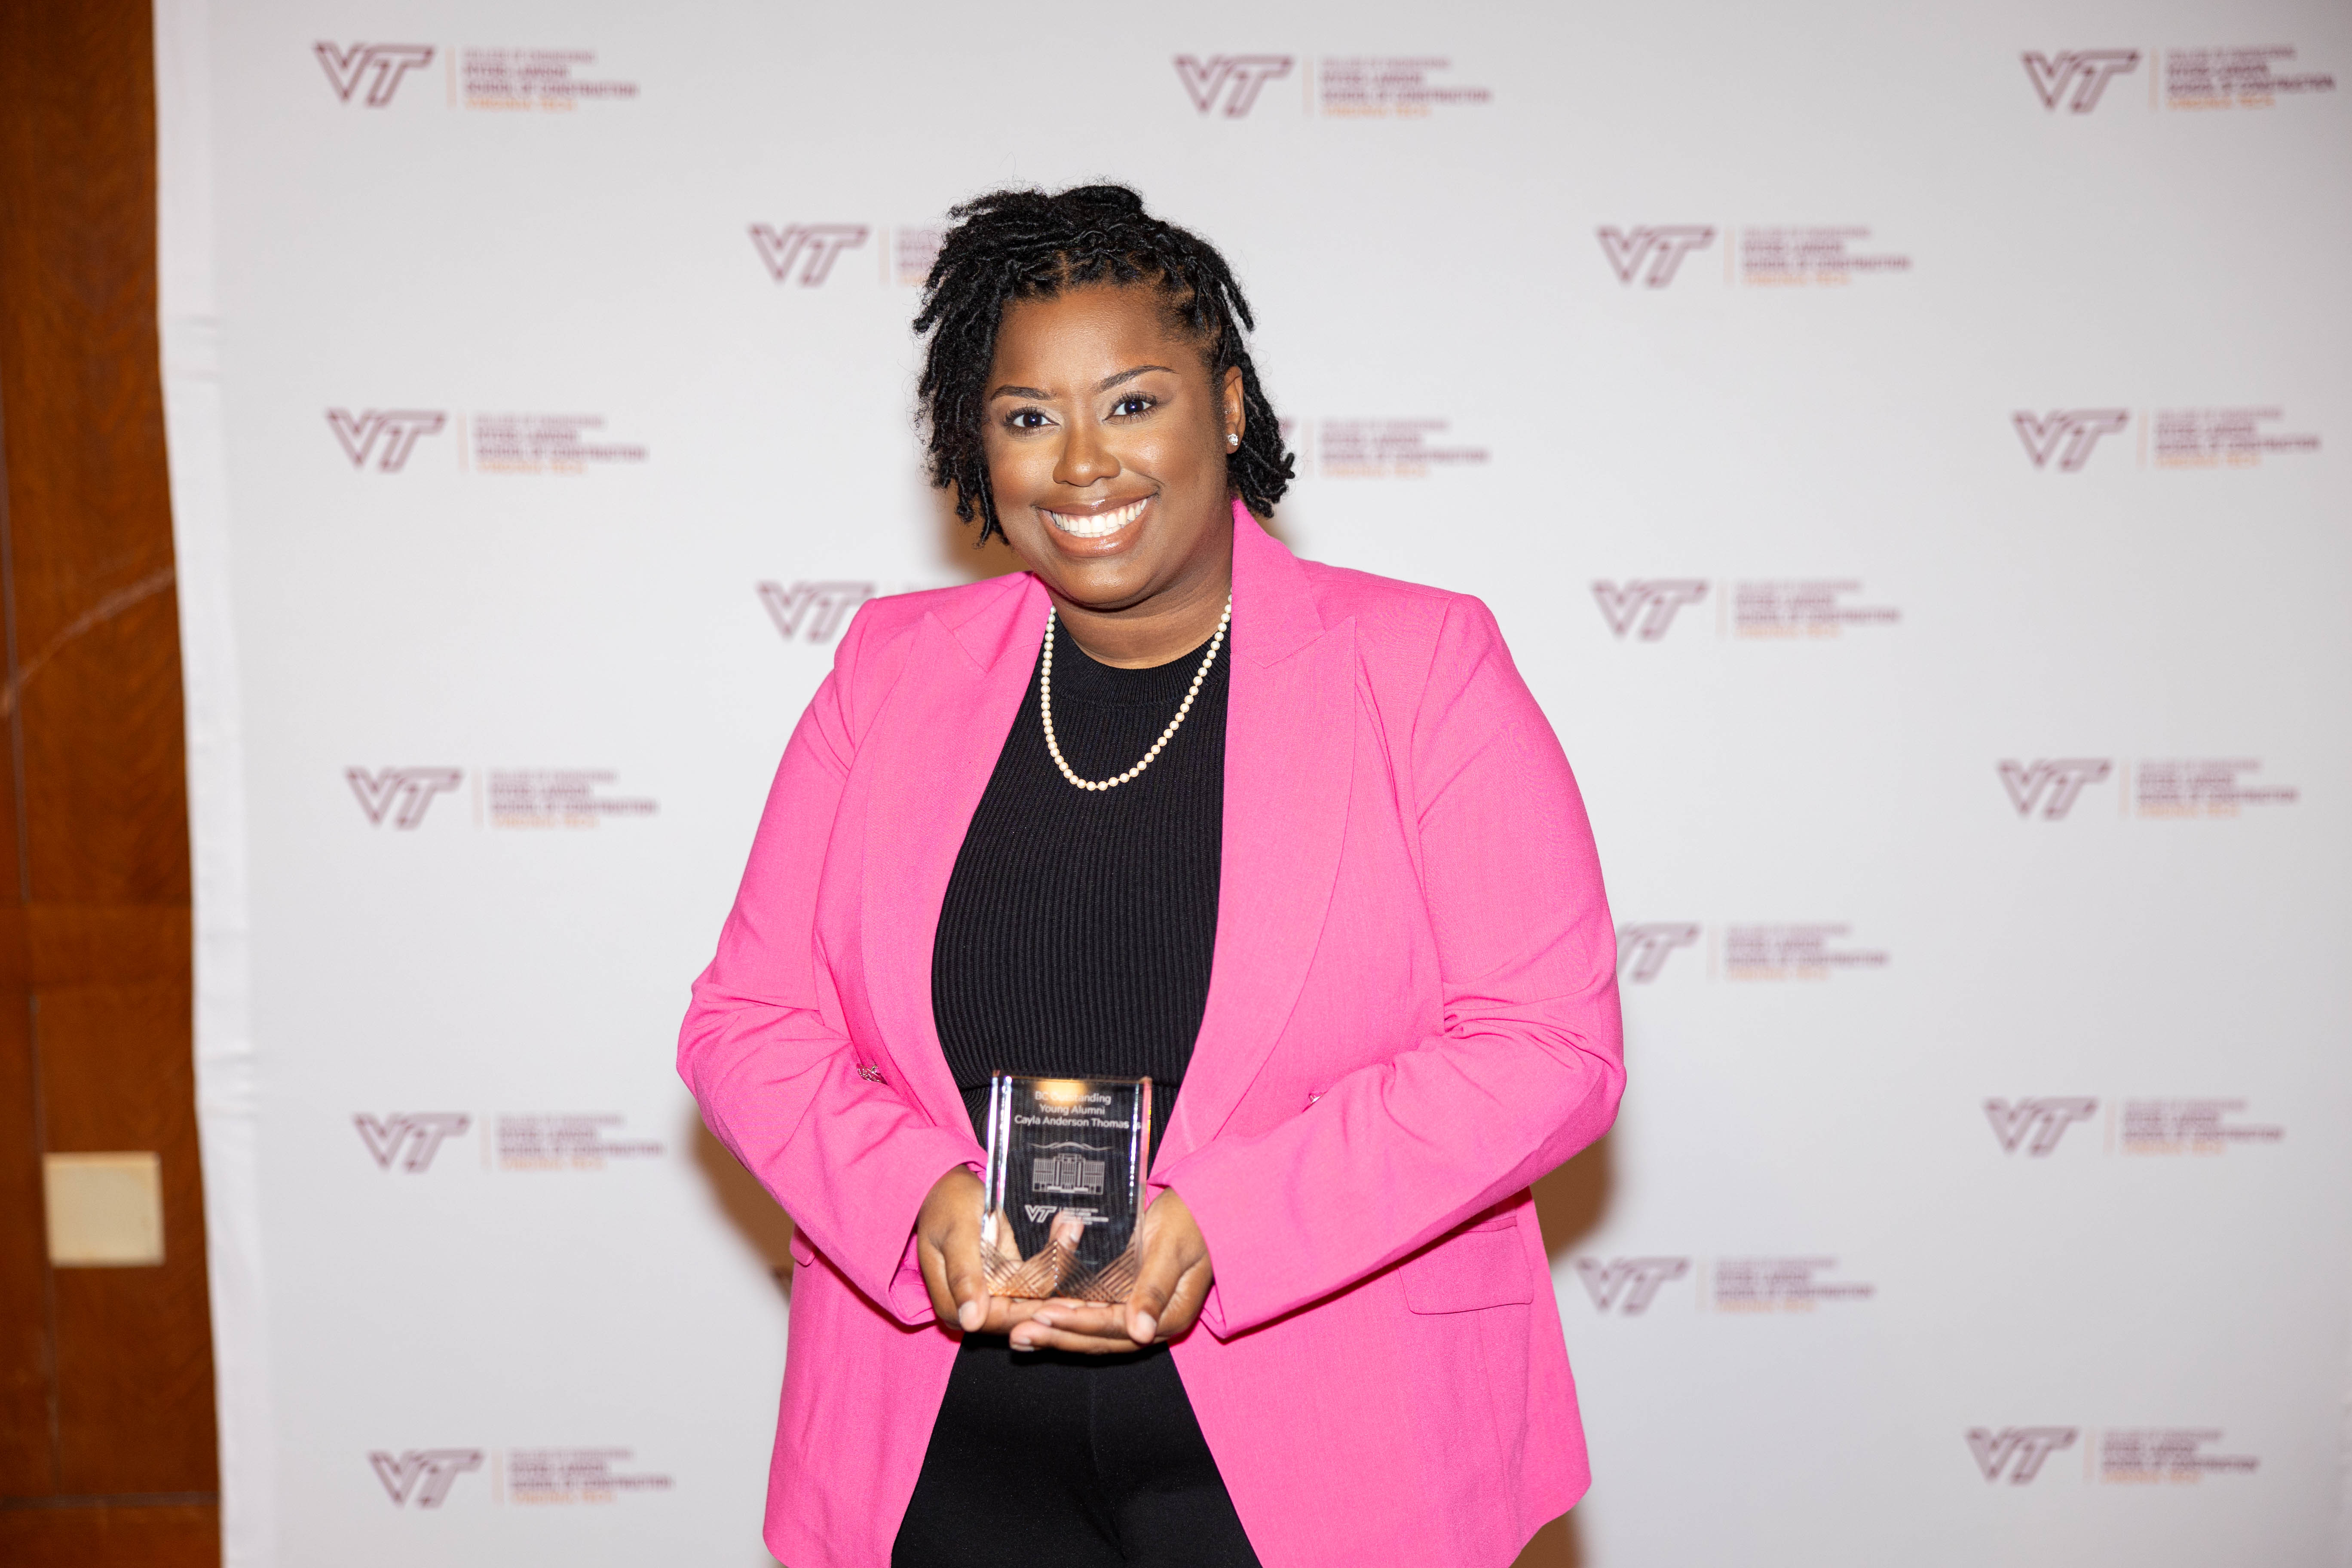 Cayla Thomas '16 with her Outstanding Young Alumni Award. Photo by Will Drew for Virginia Tech.